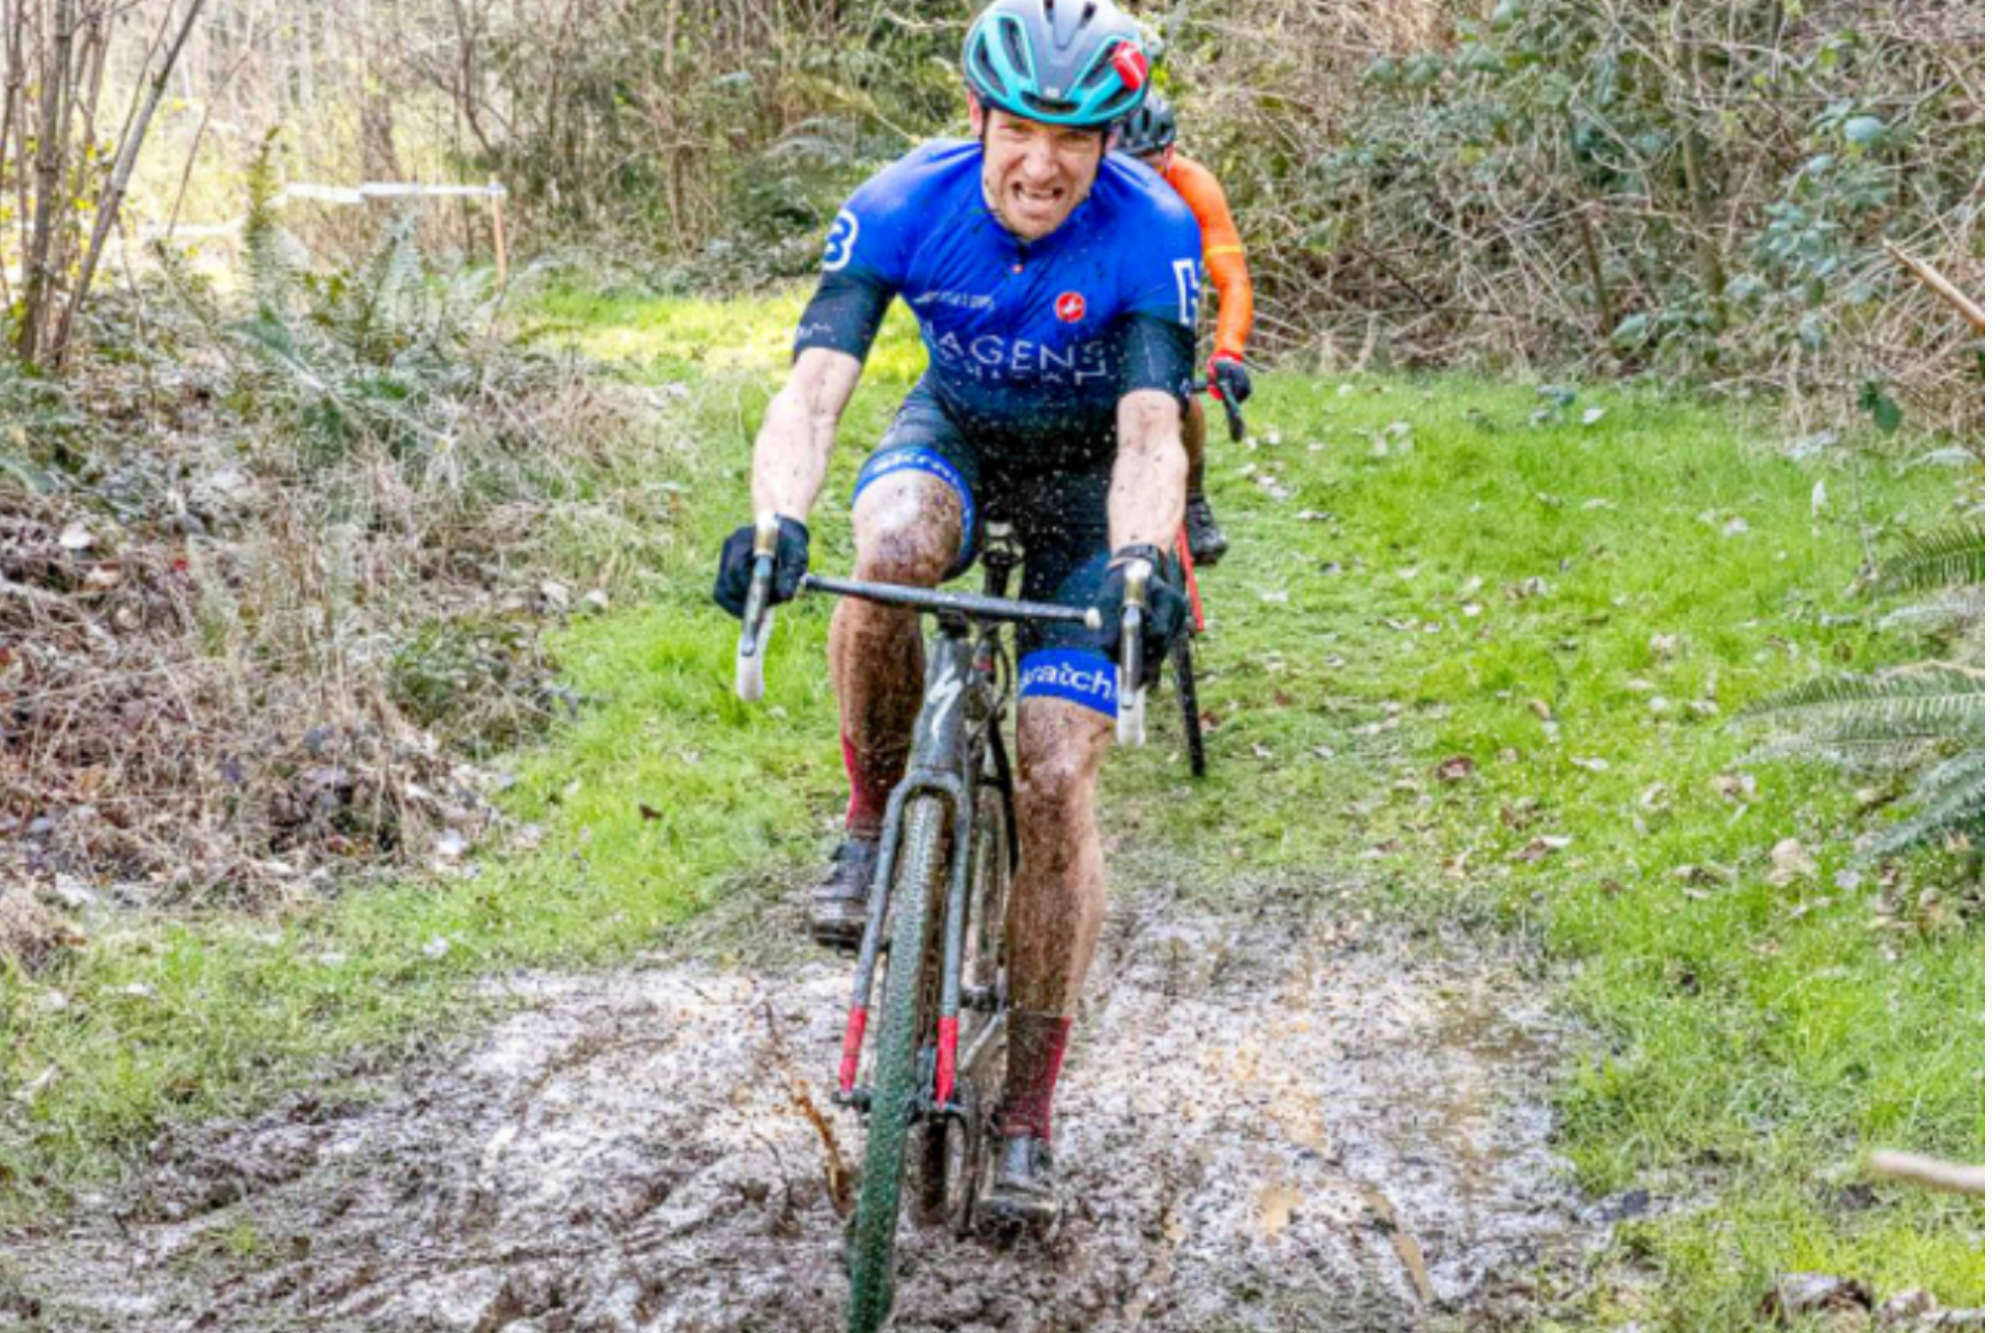 Matt Sagen/Cascadia Films
A competitor takes on the mud at Extreme Sports Park in March during a demonstration cyclocross race. The real deal put on by Peninsula Adventure Sports is coming back to ESP on Saturday and Sunday.